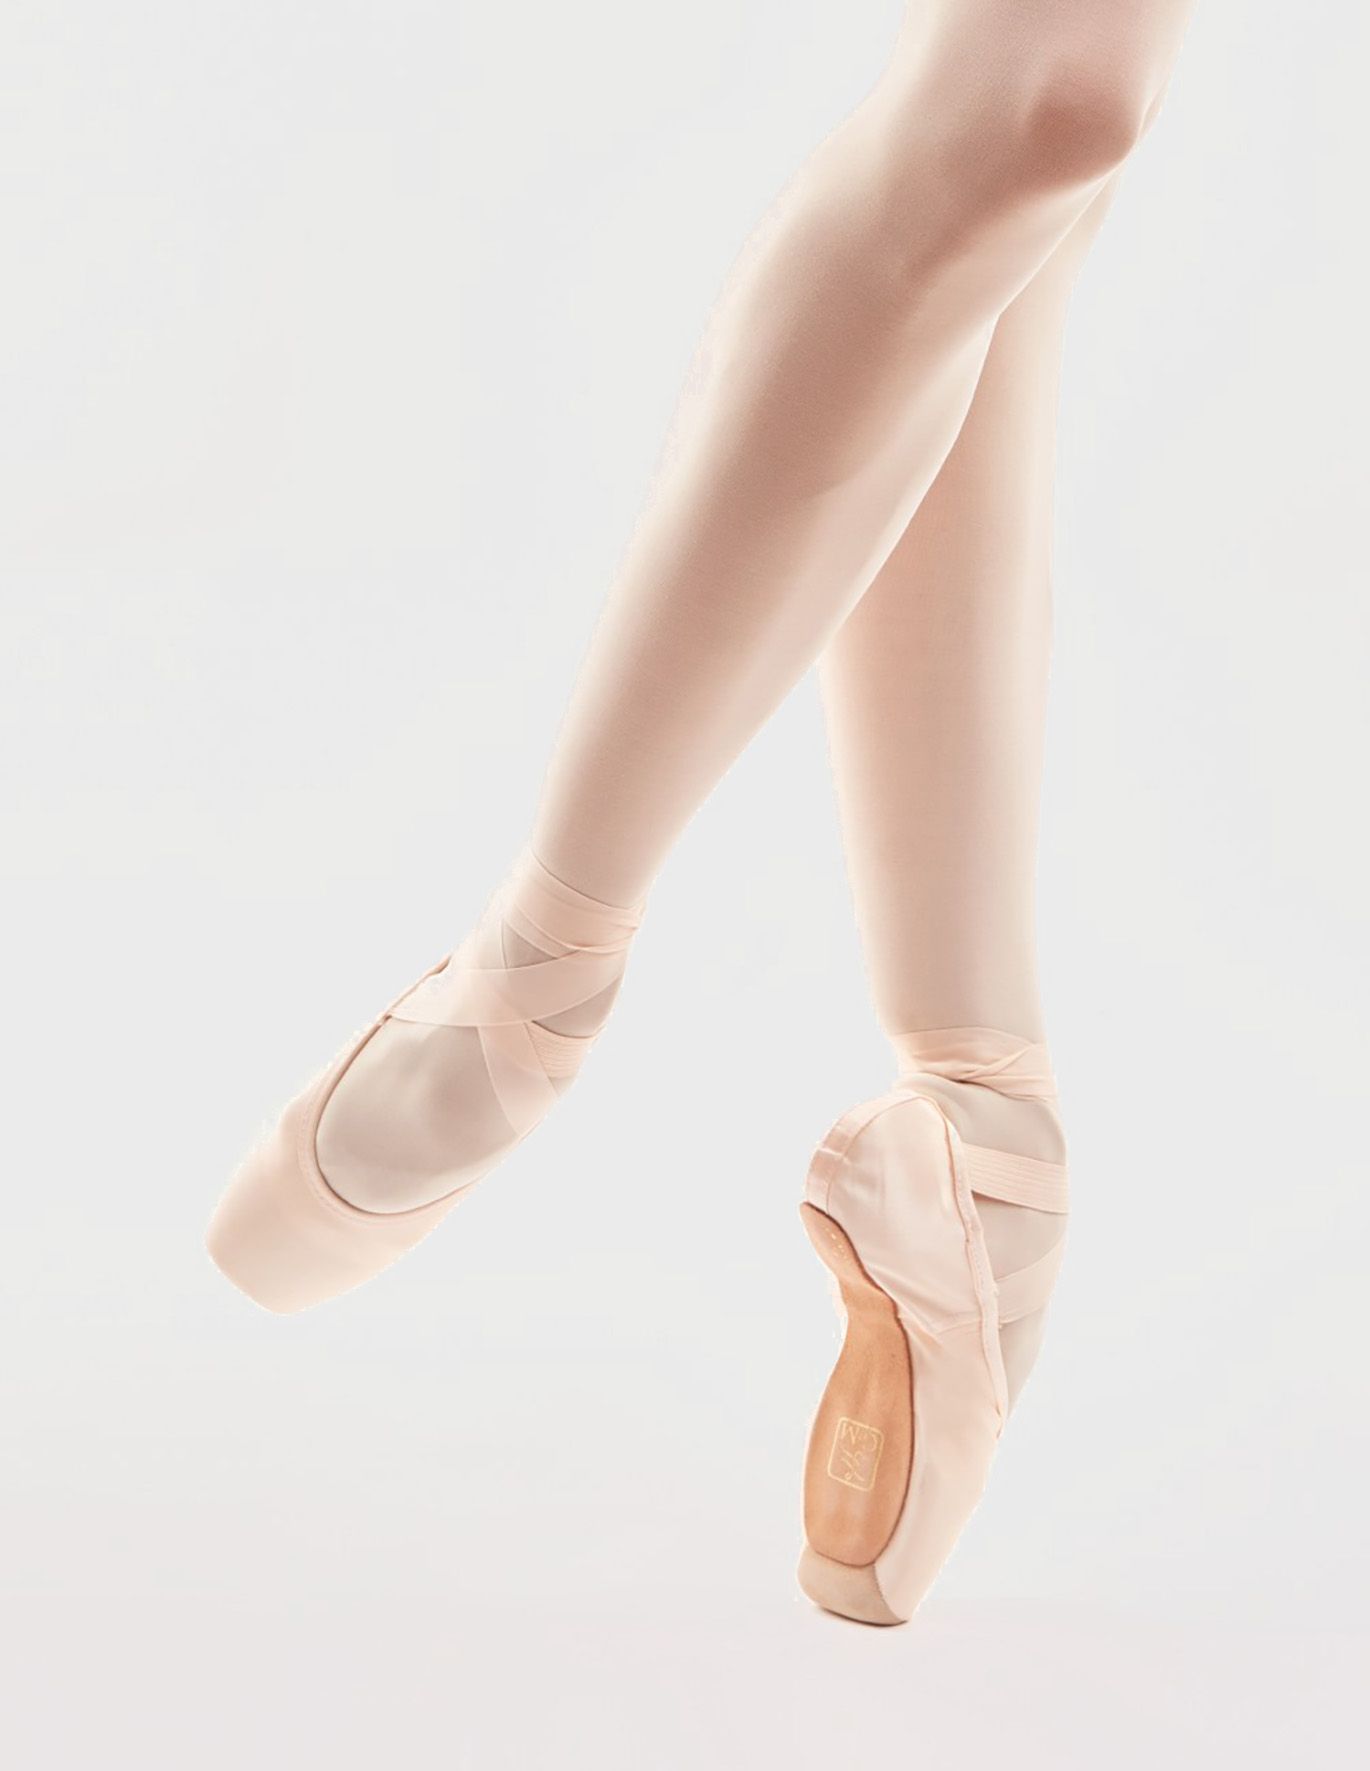 Gaynor Minden Supple Sculpted Fit Box 4 Pointe Shoe